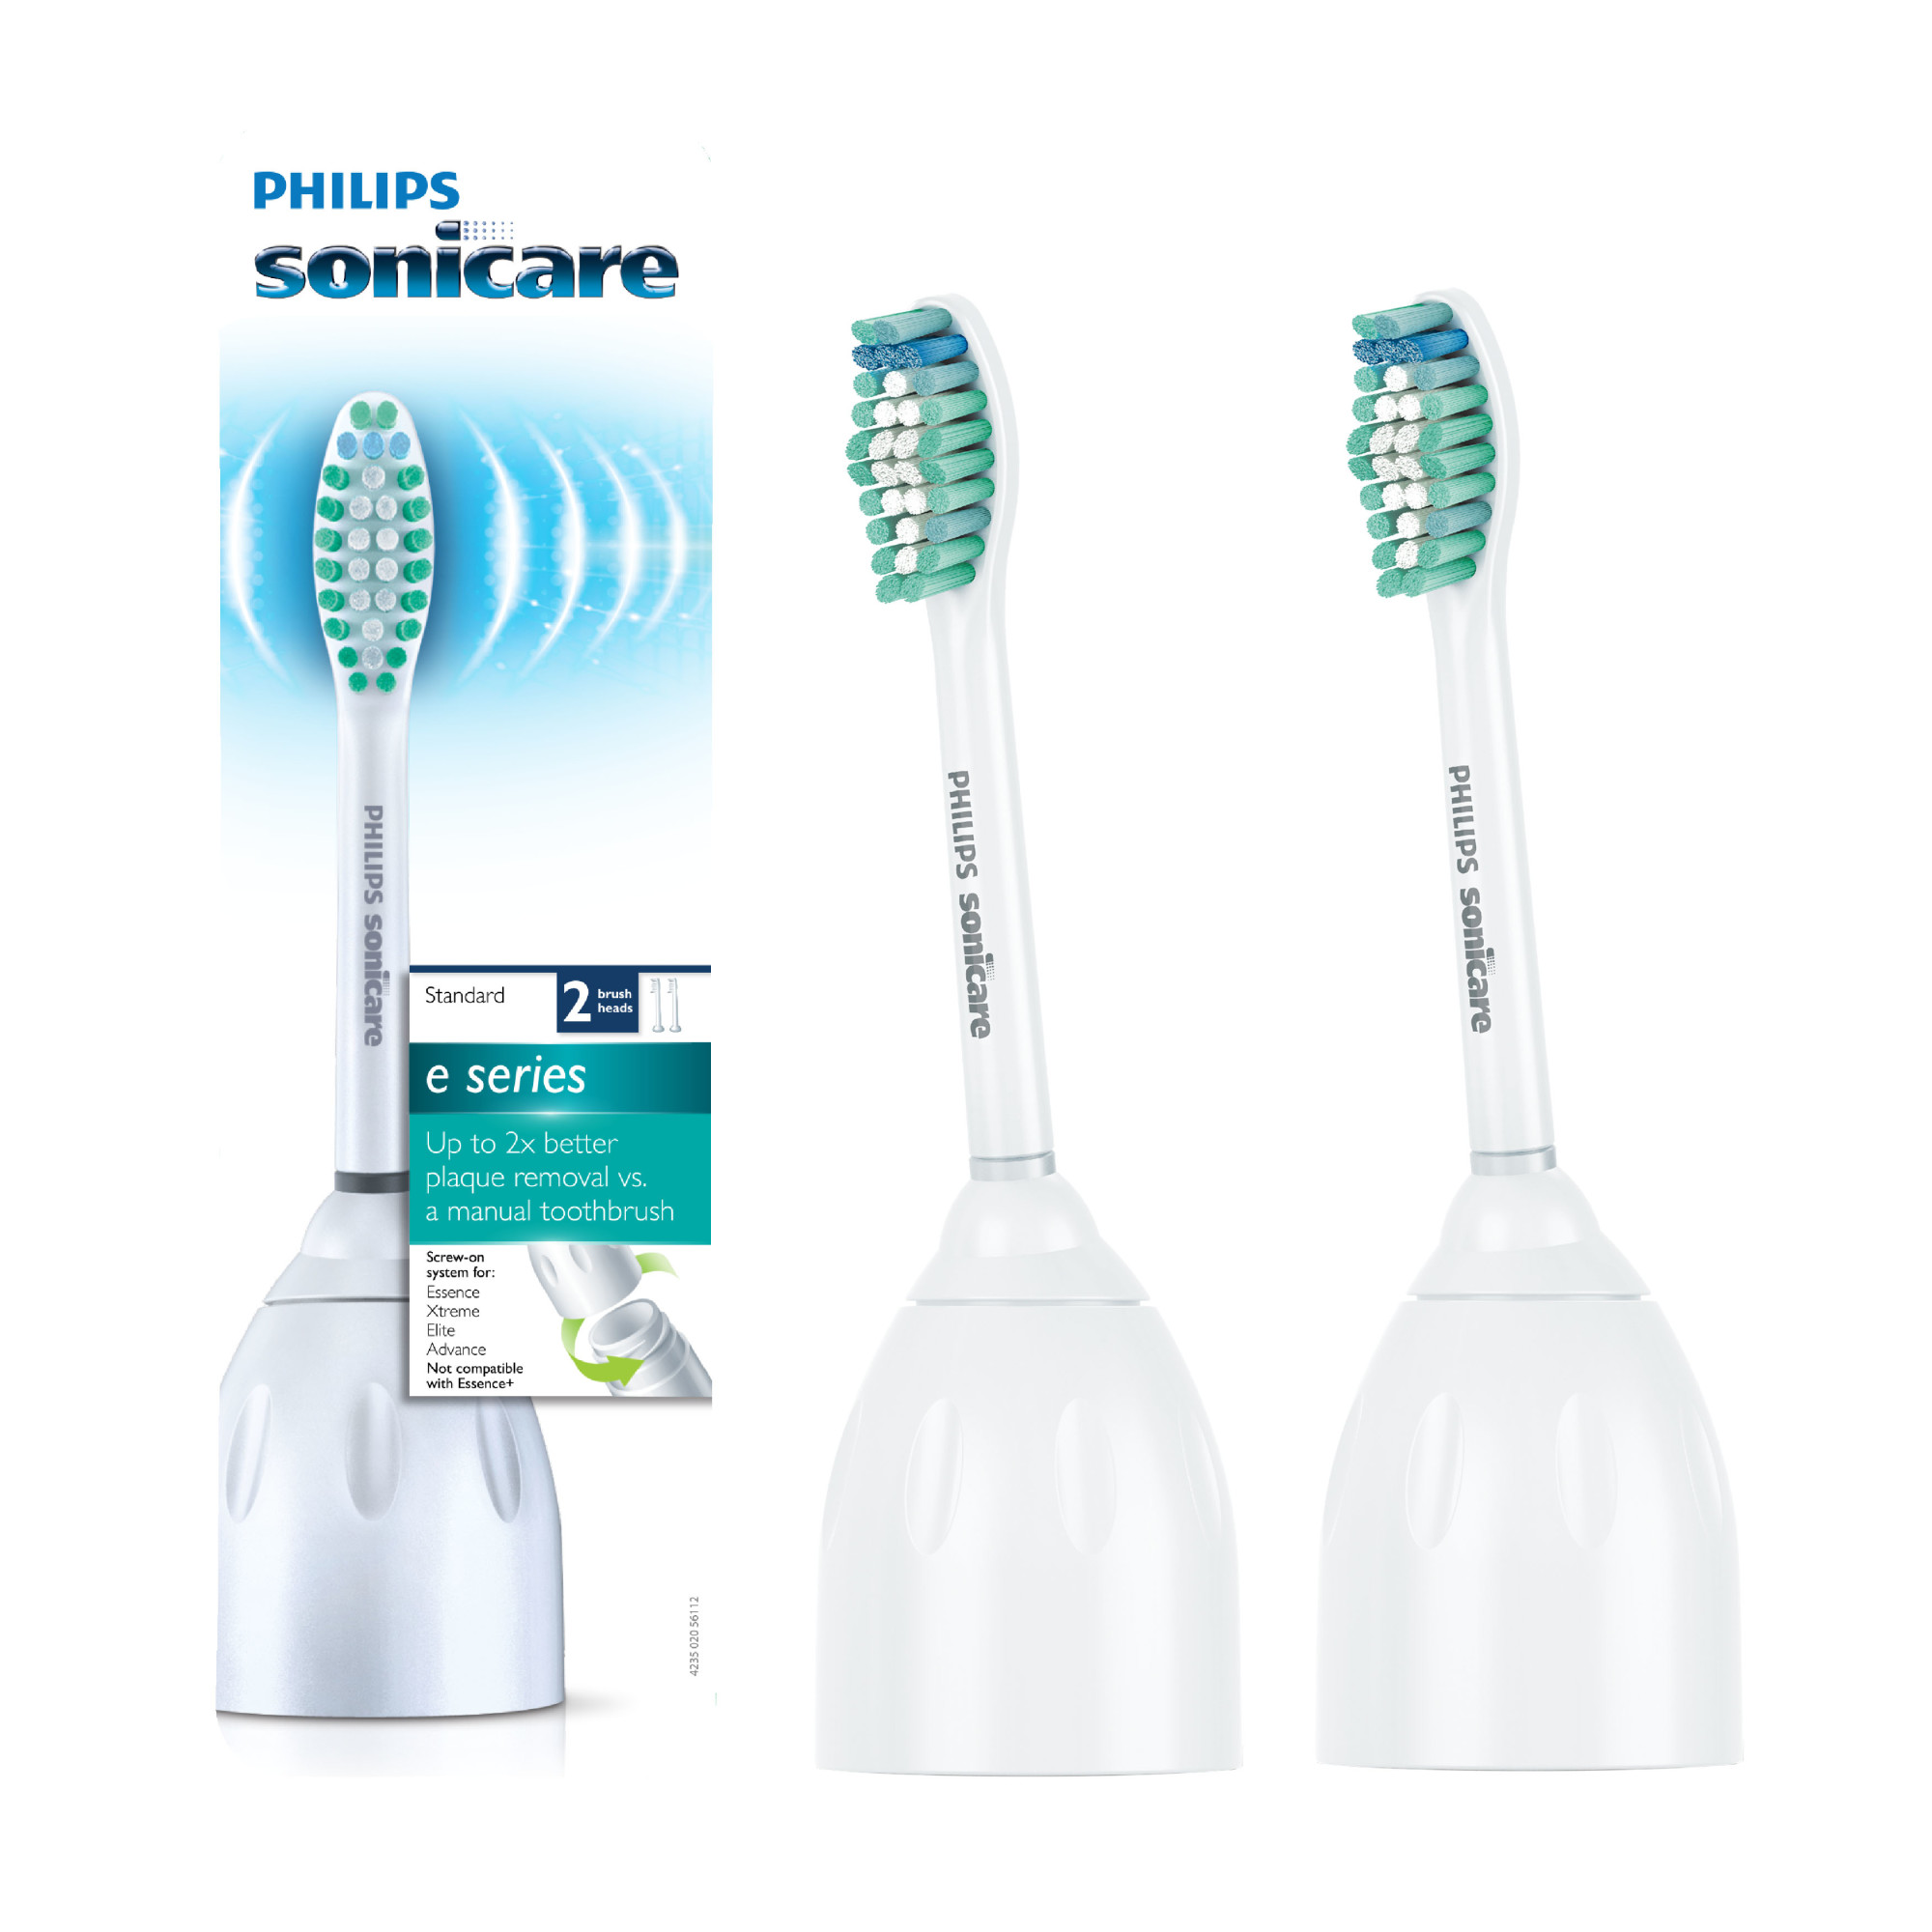 Philips Sonicare E-Series Replacement Toothbrush Heads, HX7022/66, 2-pk - image 1 of 7